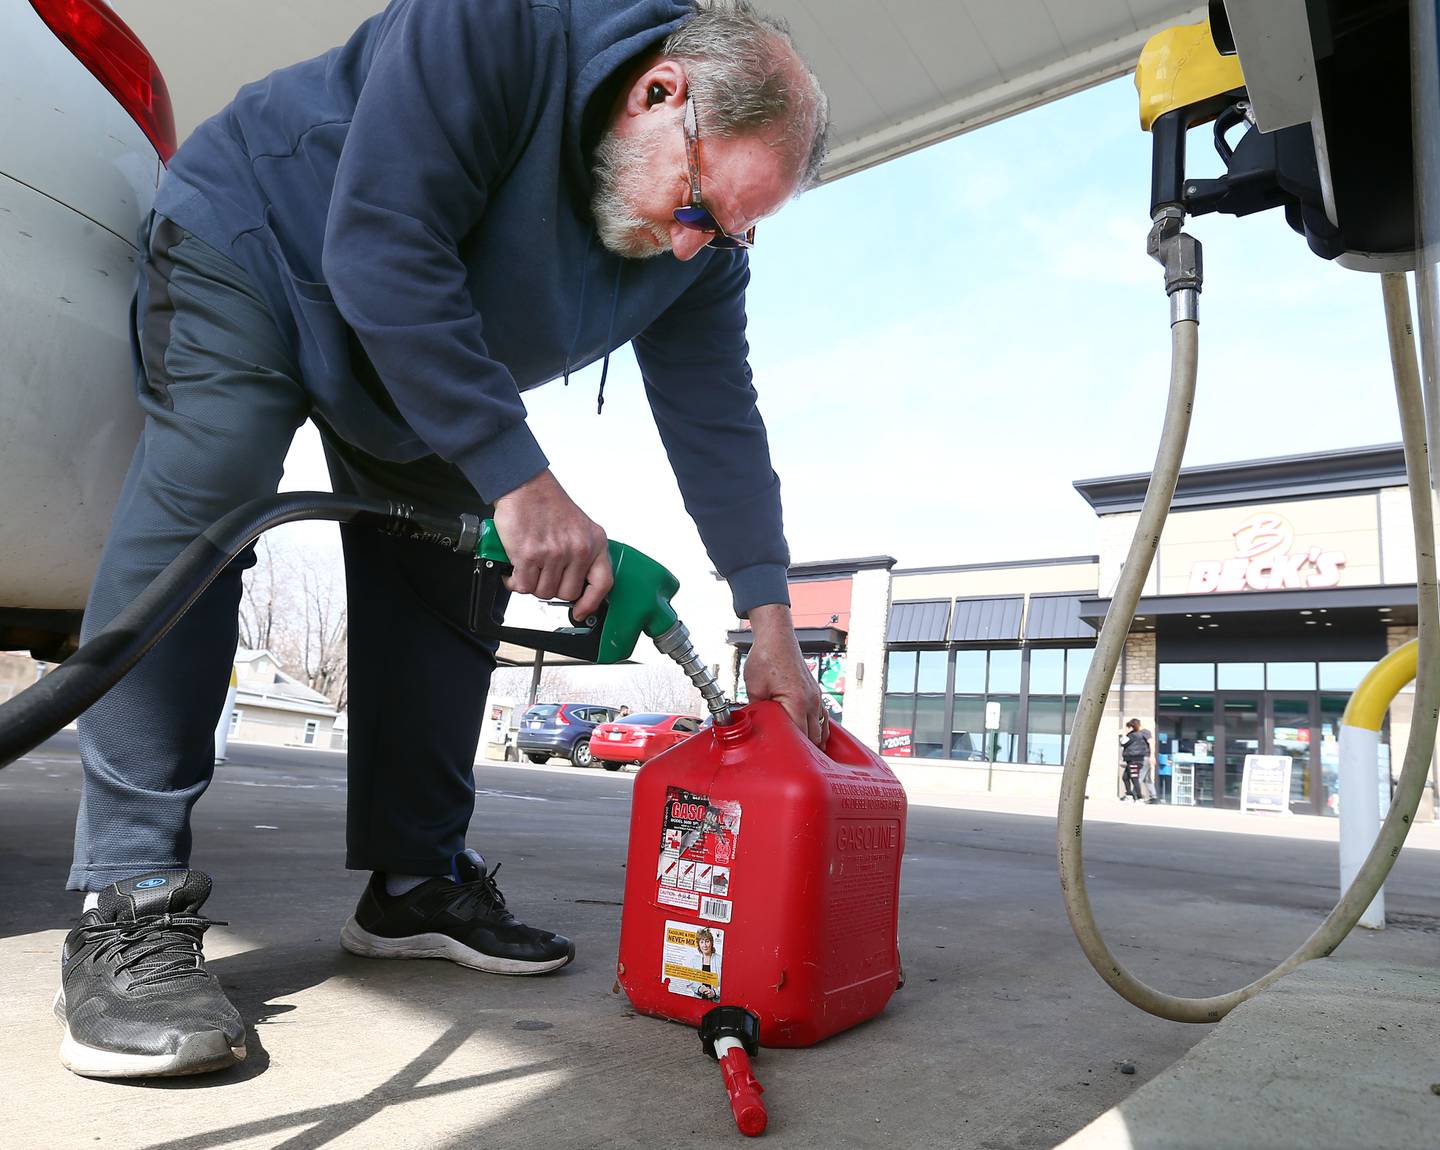 John Woelfel of Niles, Mich., fills up his 5-gallon gas tank on Thursday, March 17, 2022. Oil prices are currently below $100 a barrel, but the average price of a gallon of gasoline is still $4.32 a gallon.